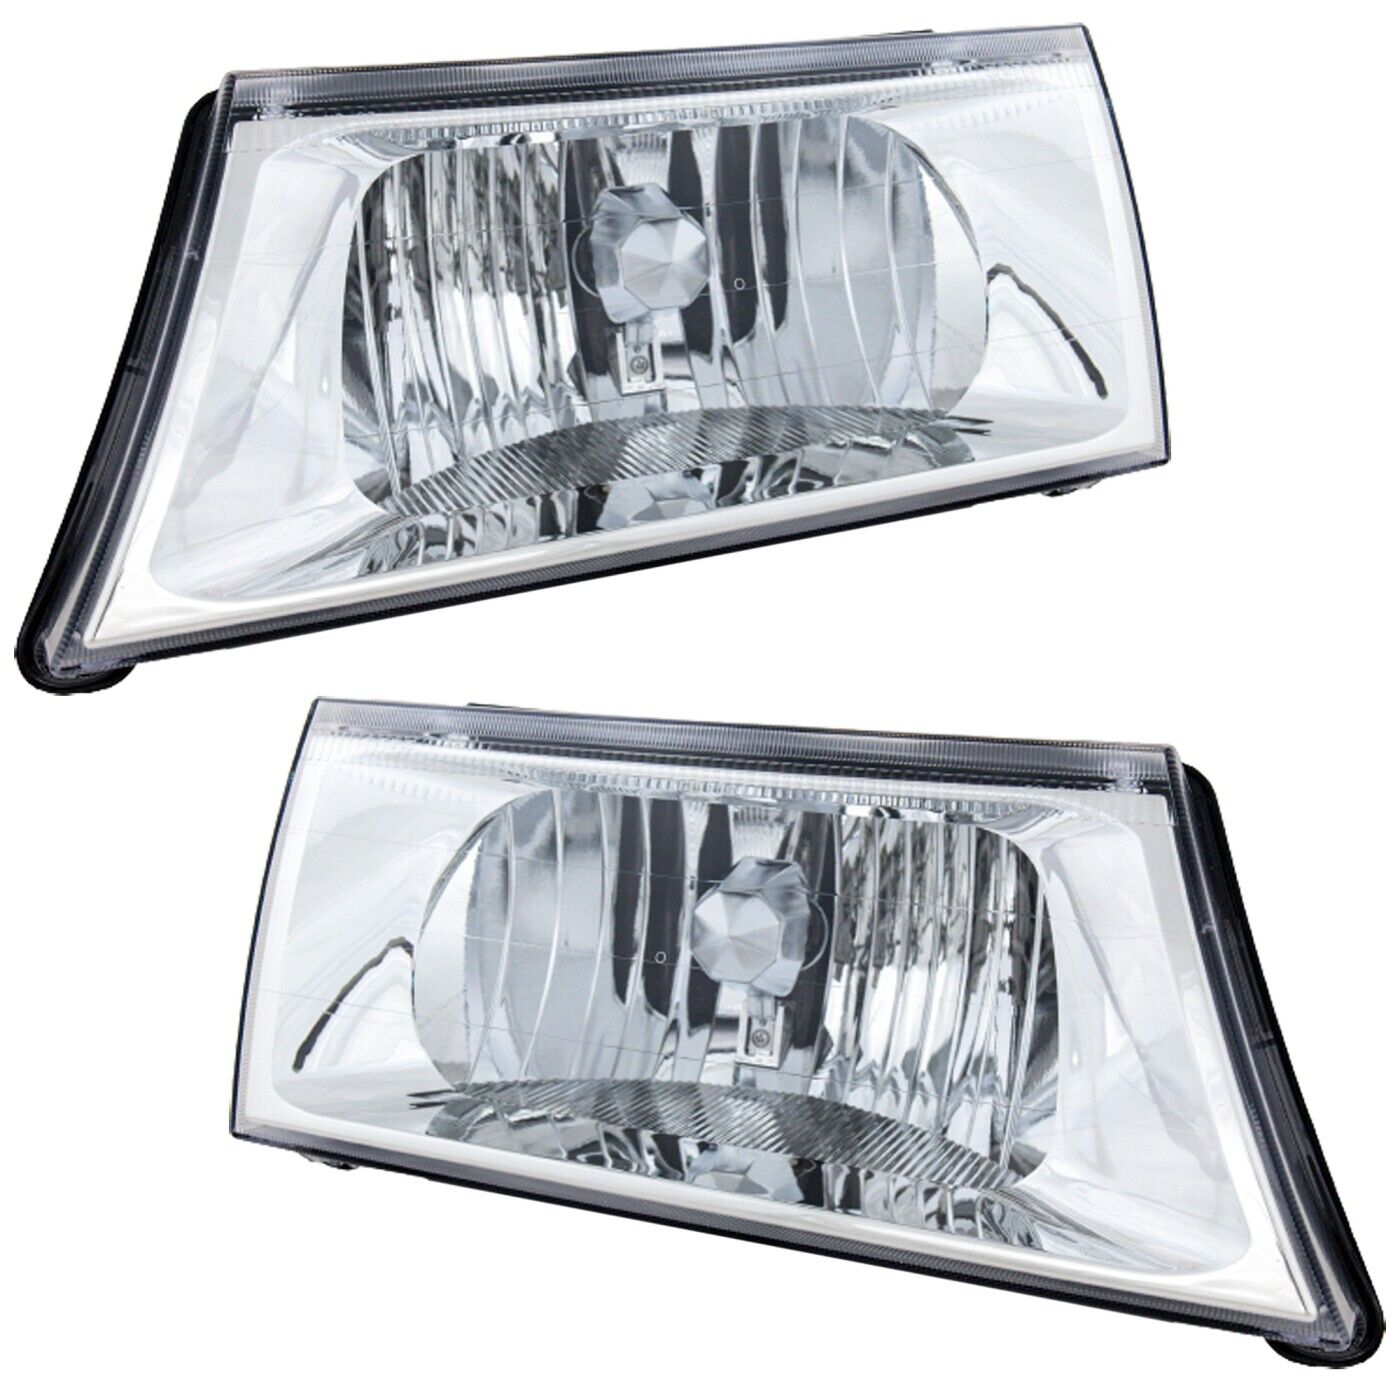 Headlight Set For 2003-2004 Mercury Grand Marquis Left and Right With Bulb 2Pc